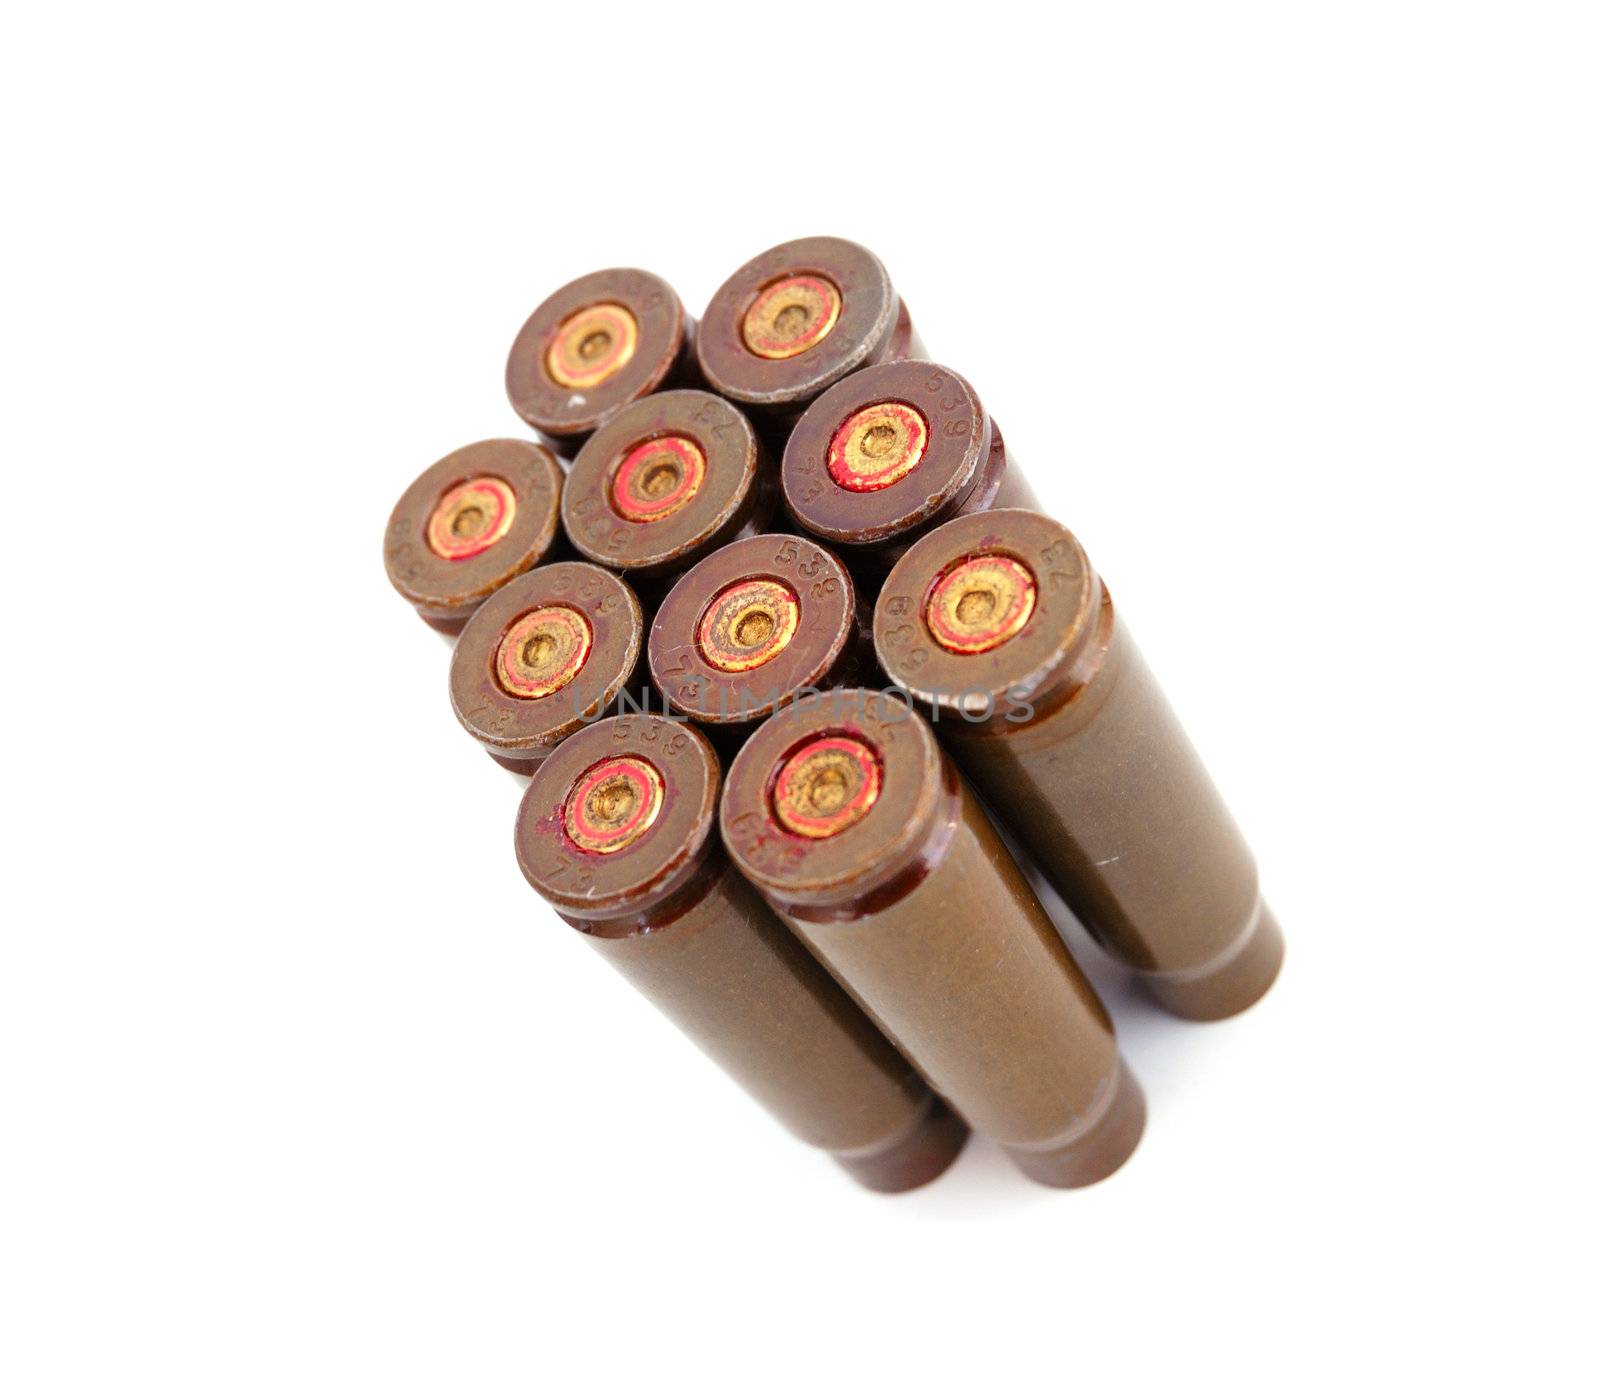 closeup of old used 7,62 mm shells (cartriges) of AK47 isolated on white